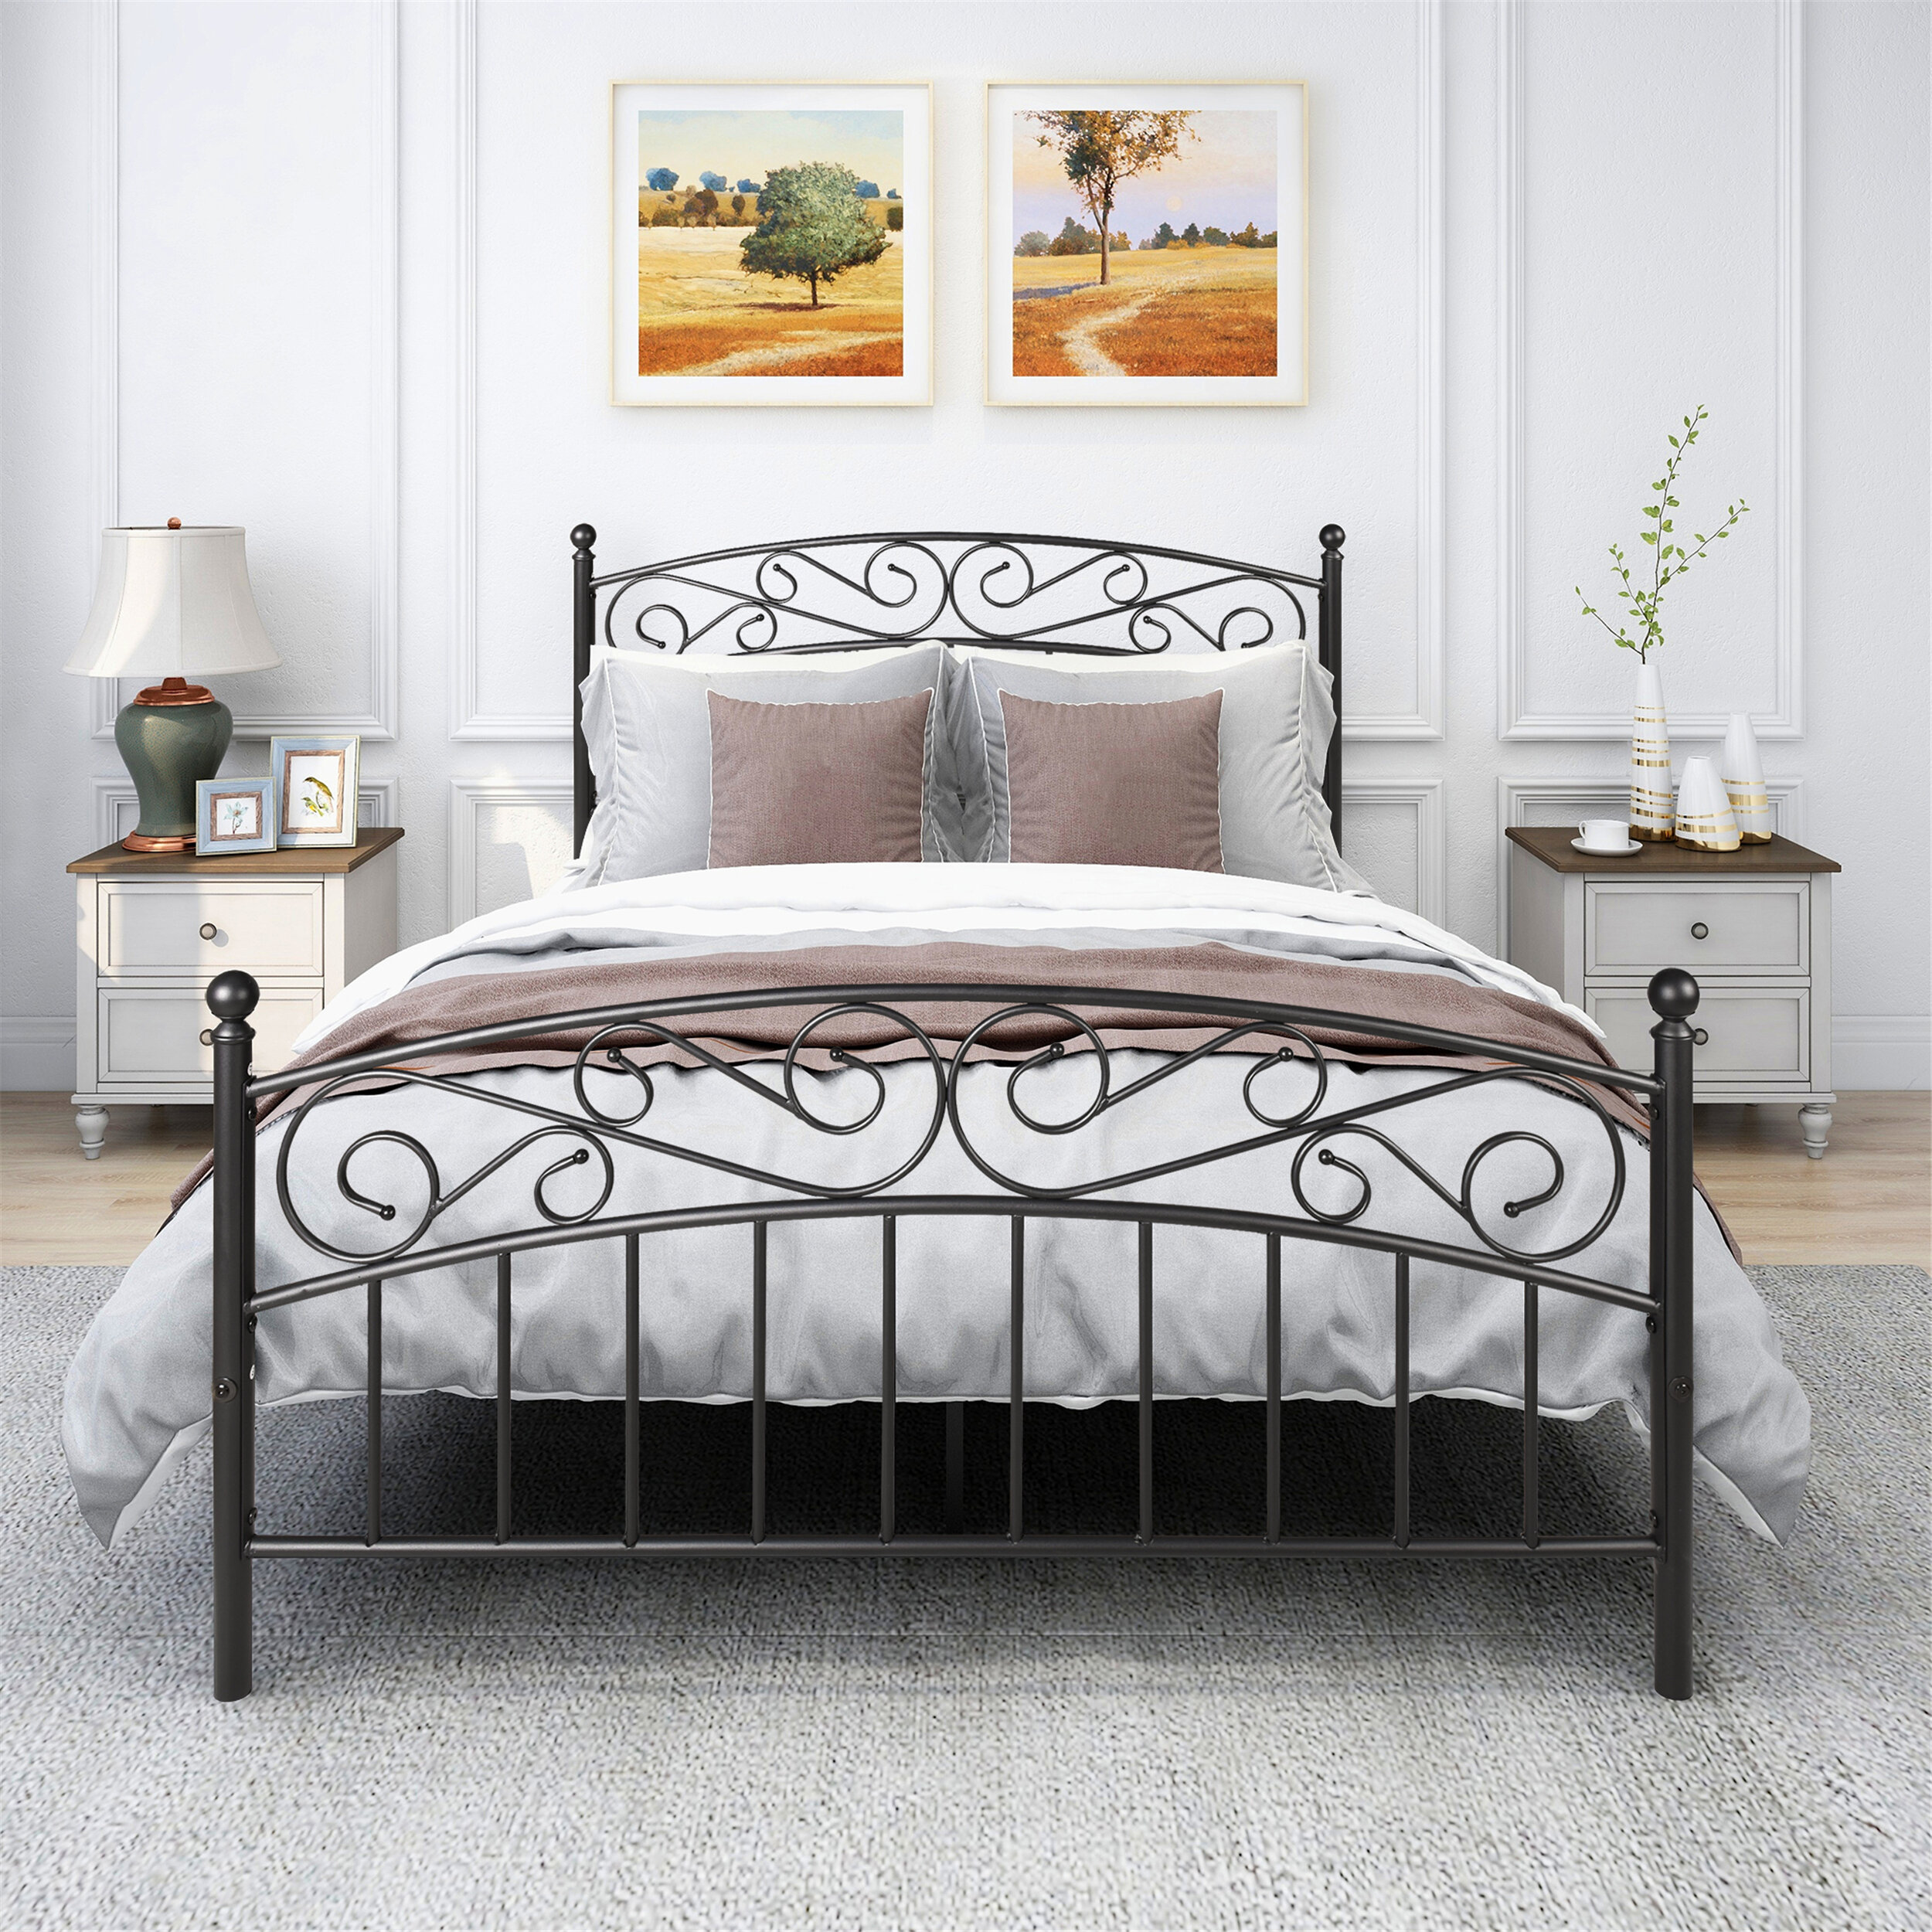 Details about   Metal Classic Headboard Full Queen Size Black Vintage Bed Frame Traditional 